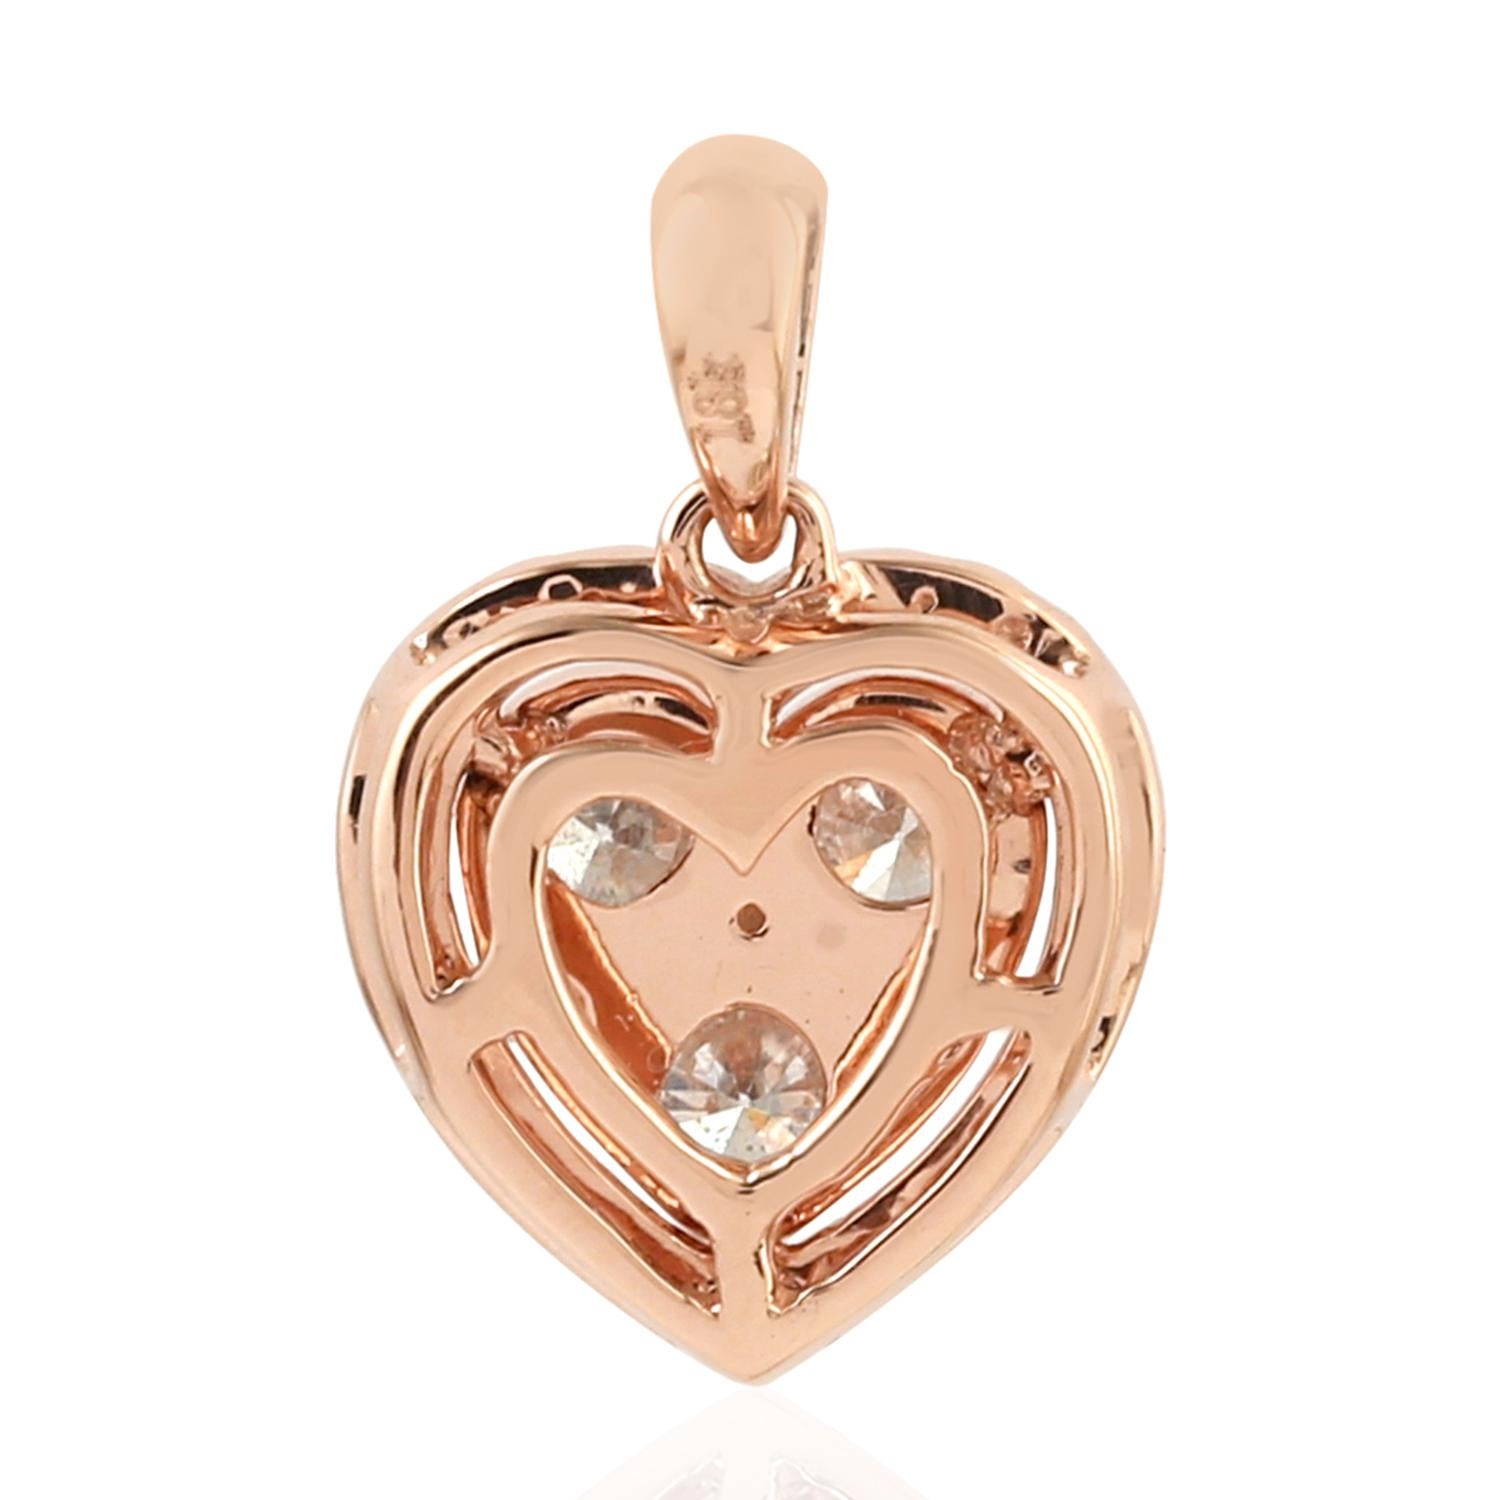 This pendant has been meticulously crafted from 18-karat gold. It is hand set in .71 carats of sparkling diamonds. See other matching pieces that compliments with Heart Collection.

FOLLOW  MEGHNA JEWELS storefront to view the latest collection &